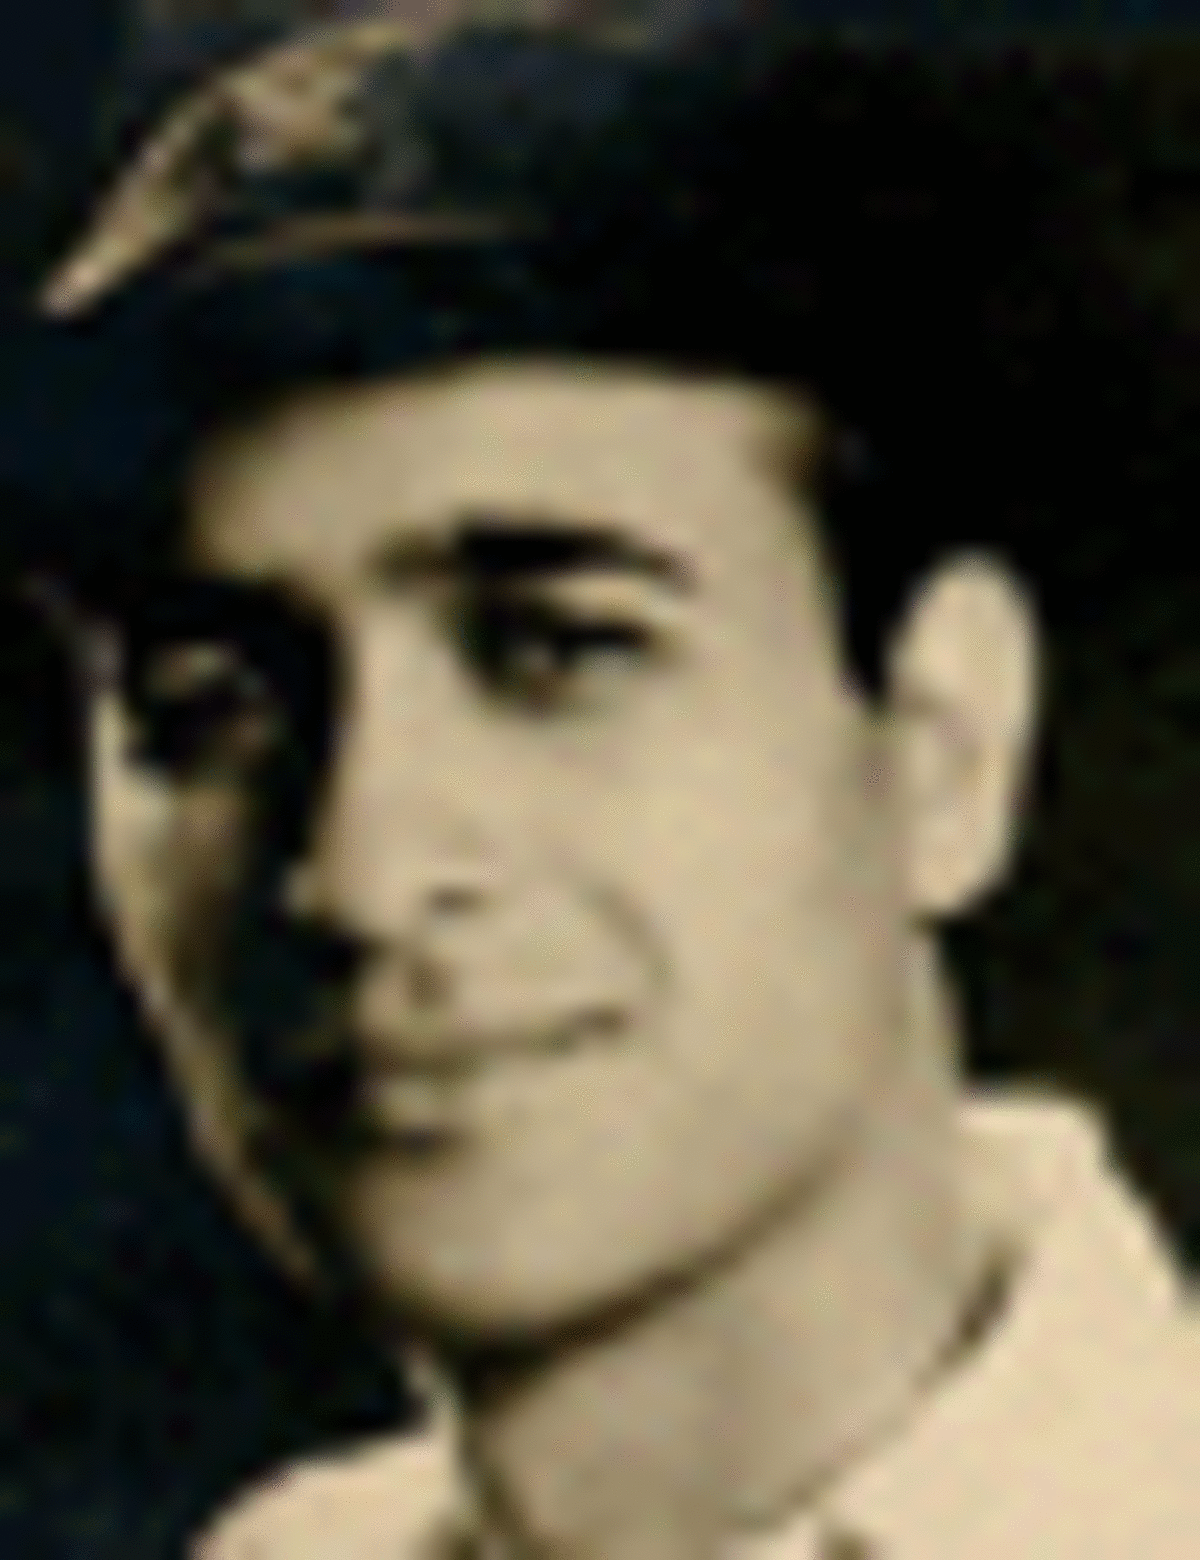 One of Pakistans early test players who played in the famous tour to England 1954 with a debut at Trent Bridge.